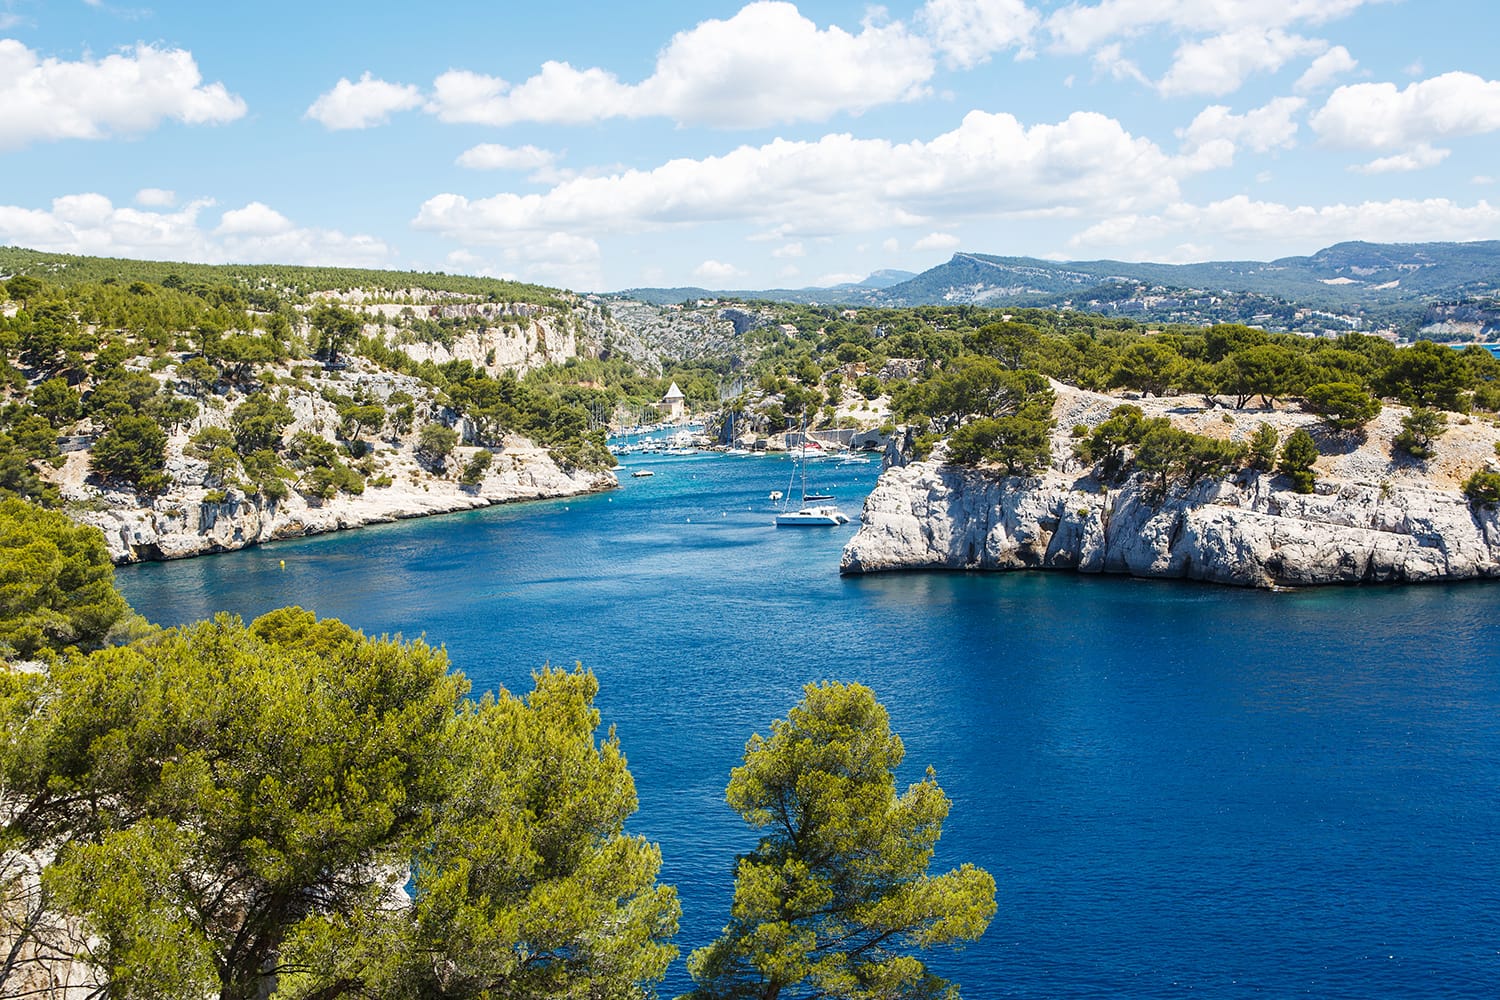 Calanques of Port Pin in Cassis, Provence, France